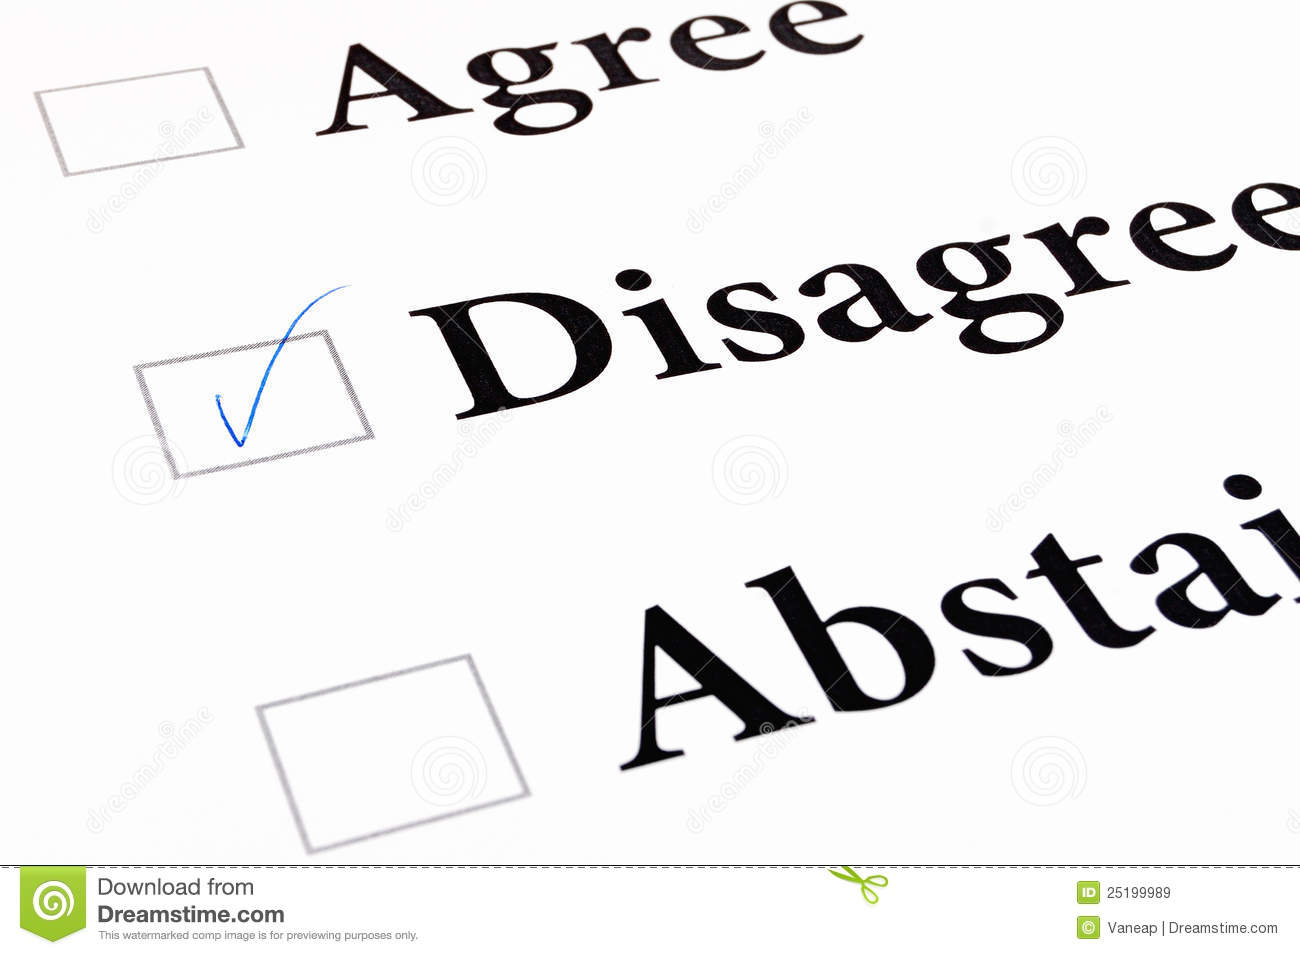 Agree Disagree Abstain Form Royalty Free Stock Images   Image    